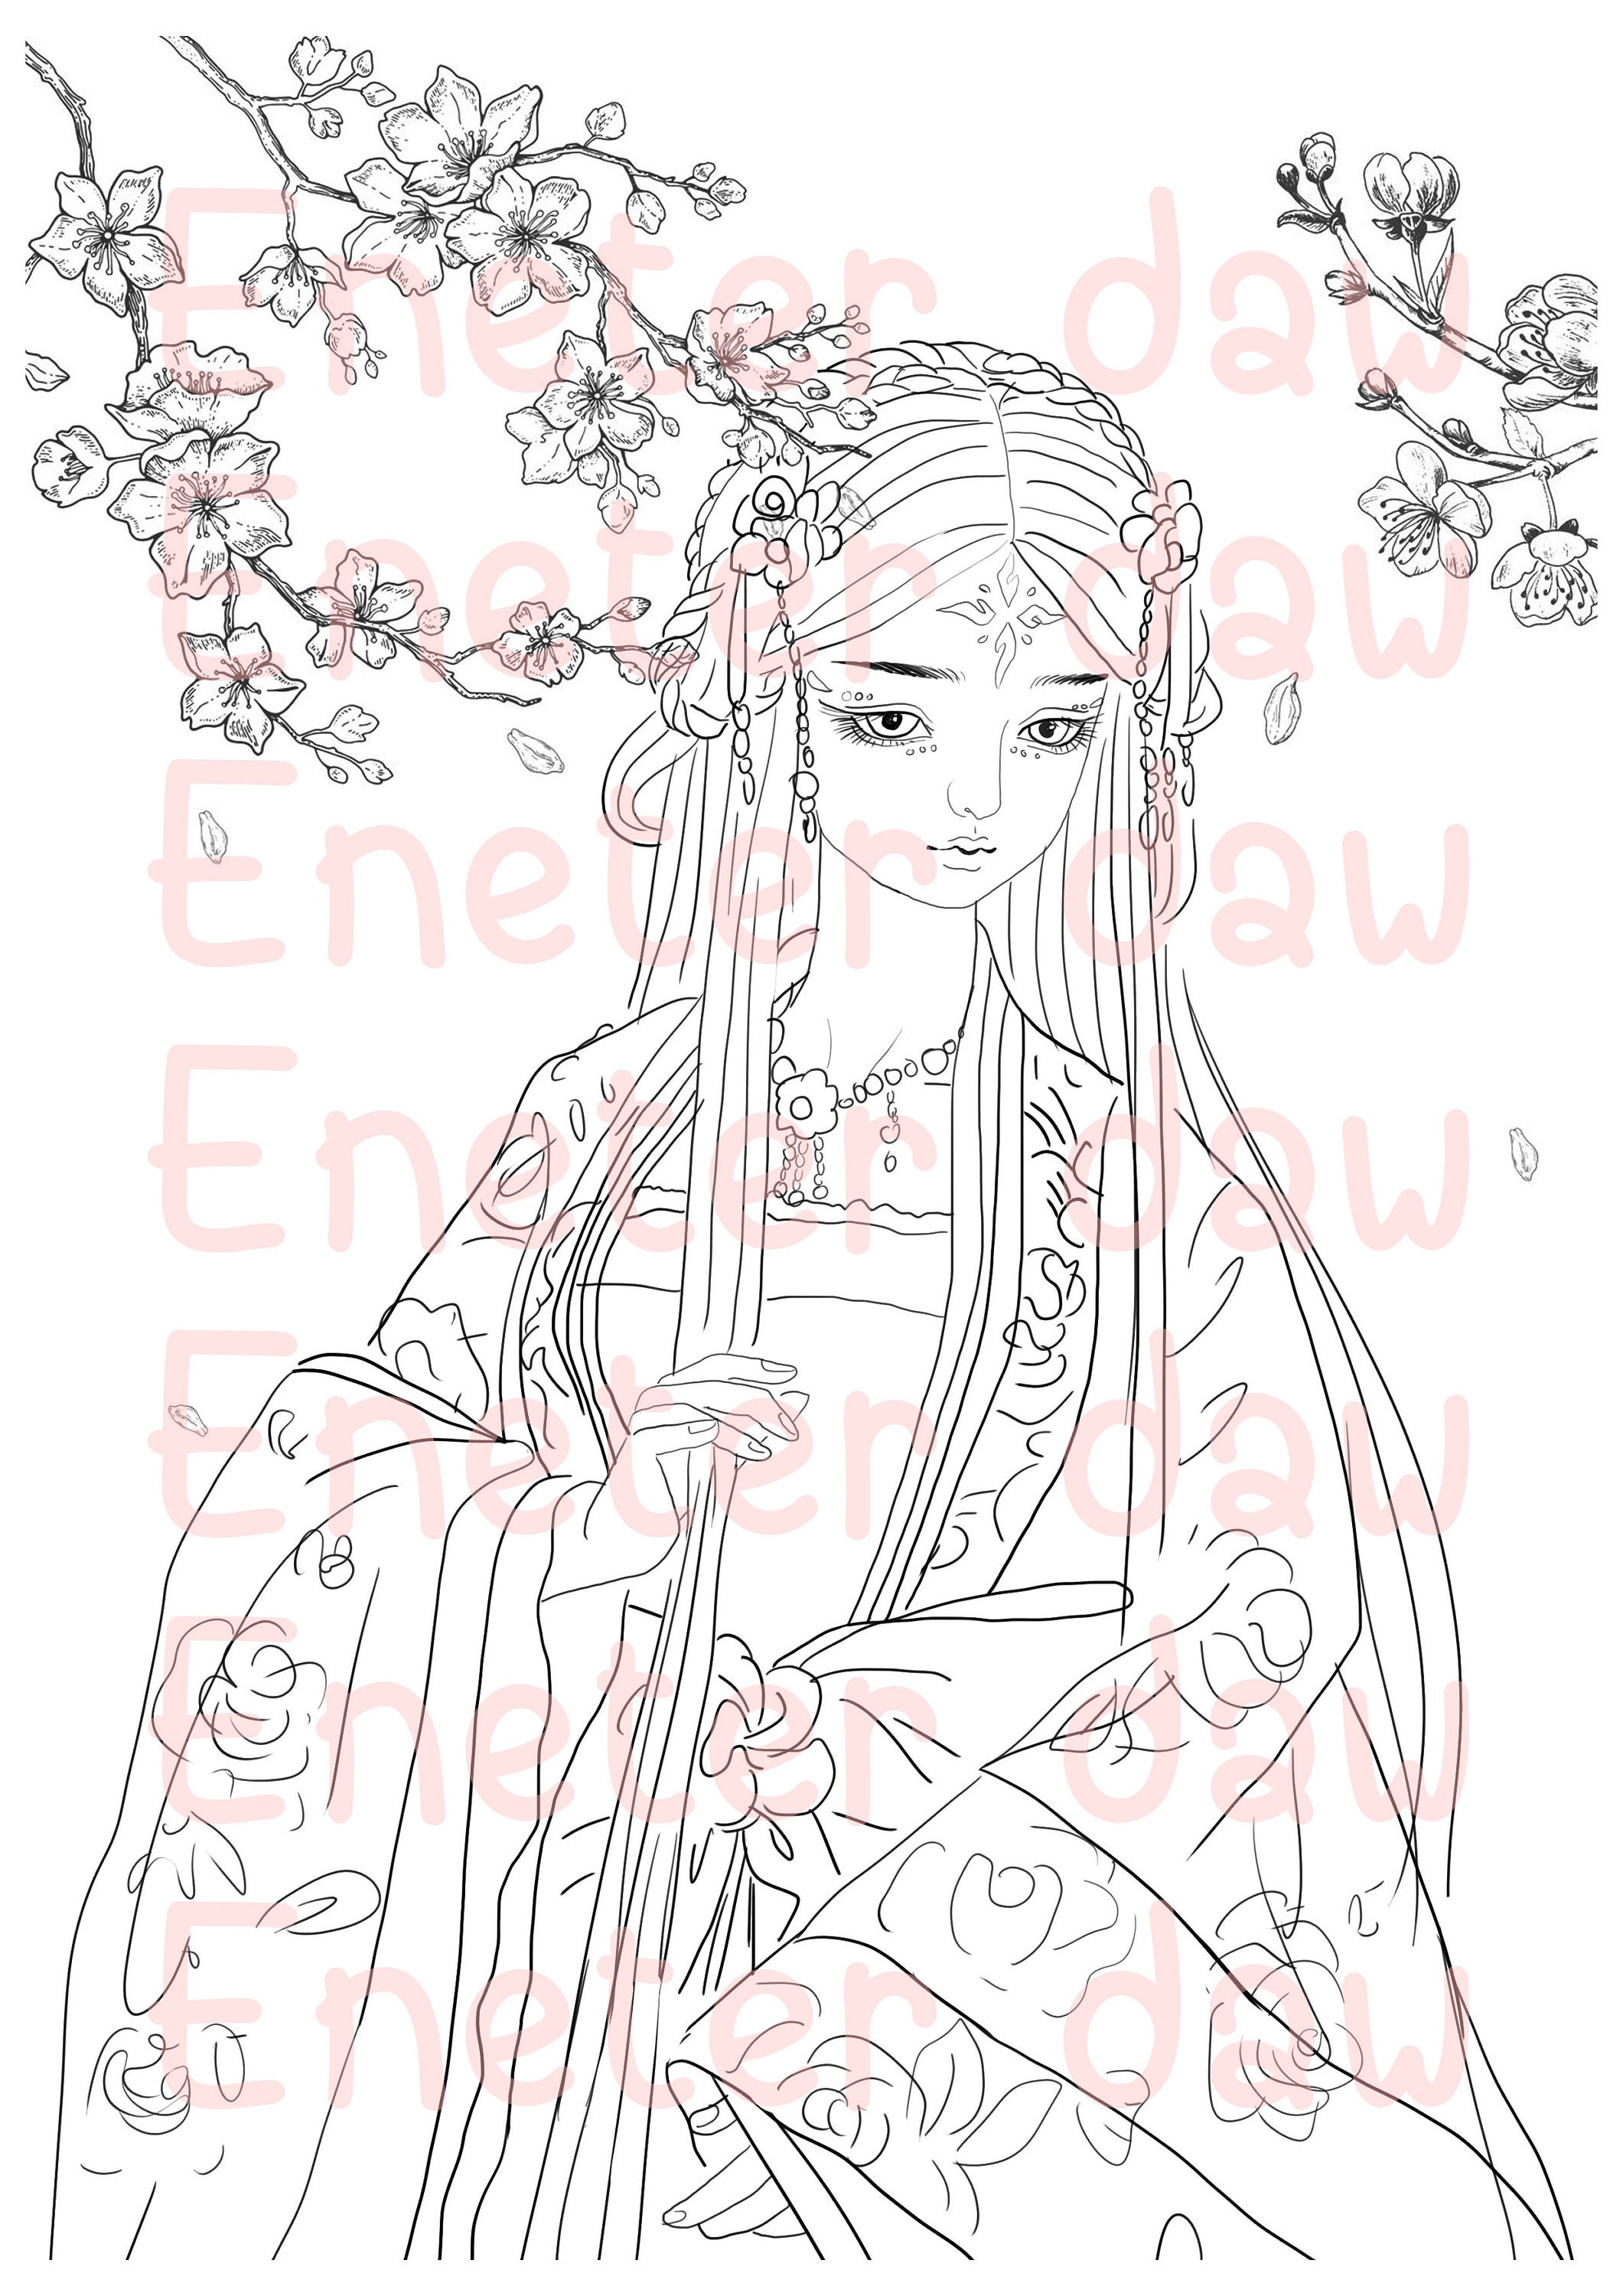 chinese Woman 20   Printable Adult Coloring Page from Favoreads Coloring  book pages for adults and kids, Coloring sheets, Coloring designs